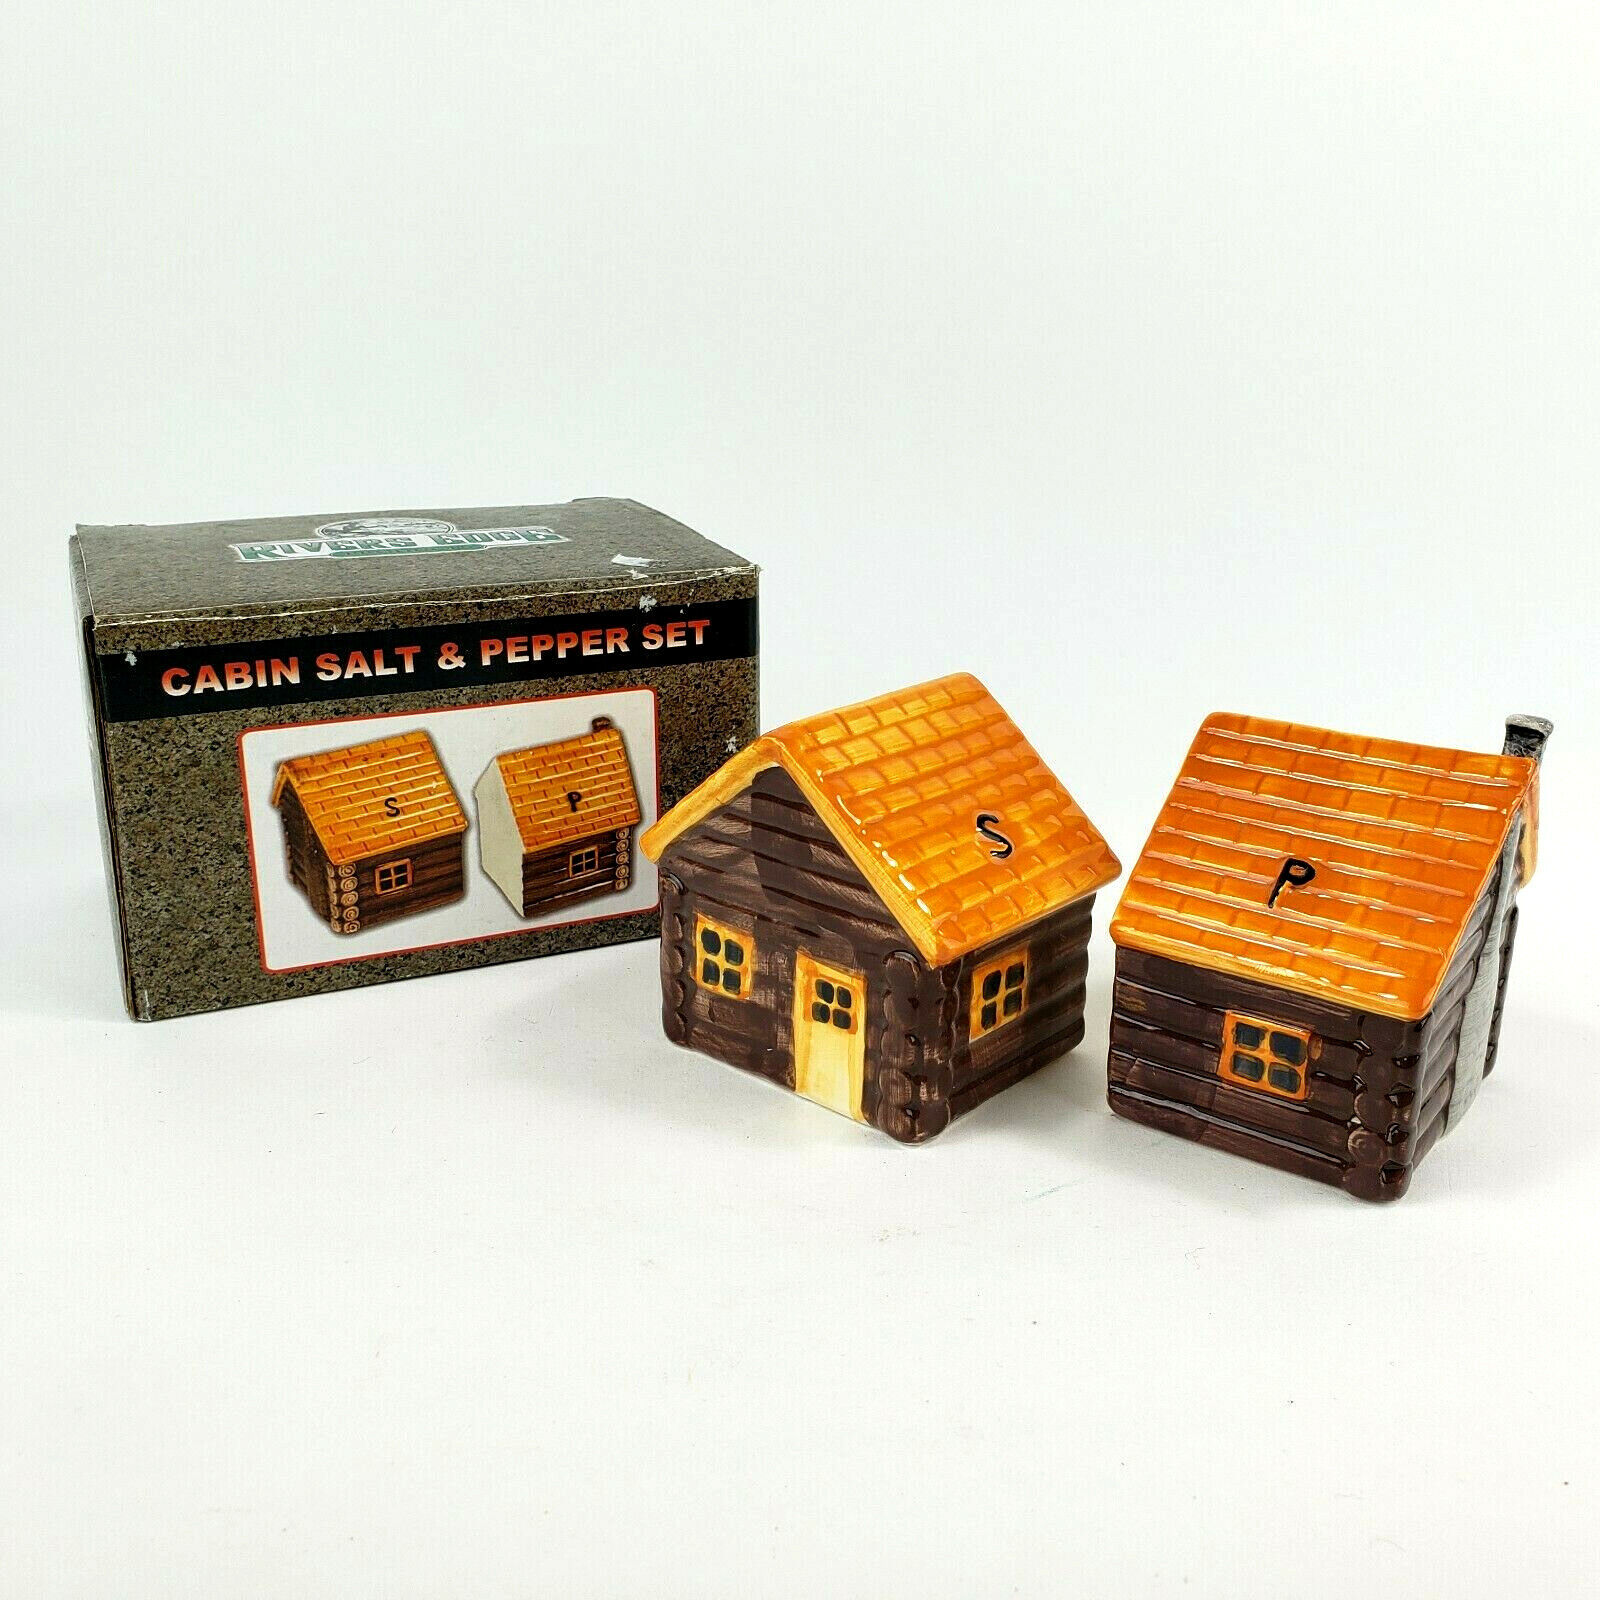 Log Cabin Salt Selling and selling Pepper Animer and price revision Camping Woodland Shakers Rivers Lodge